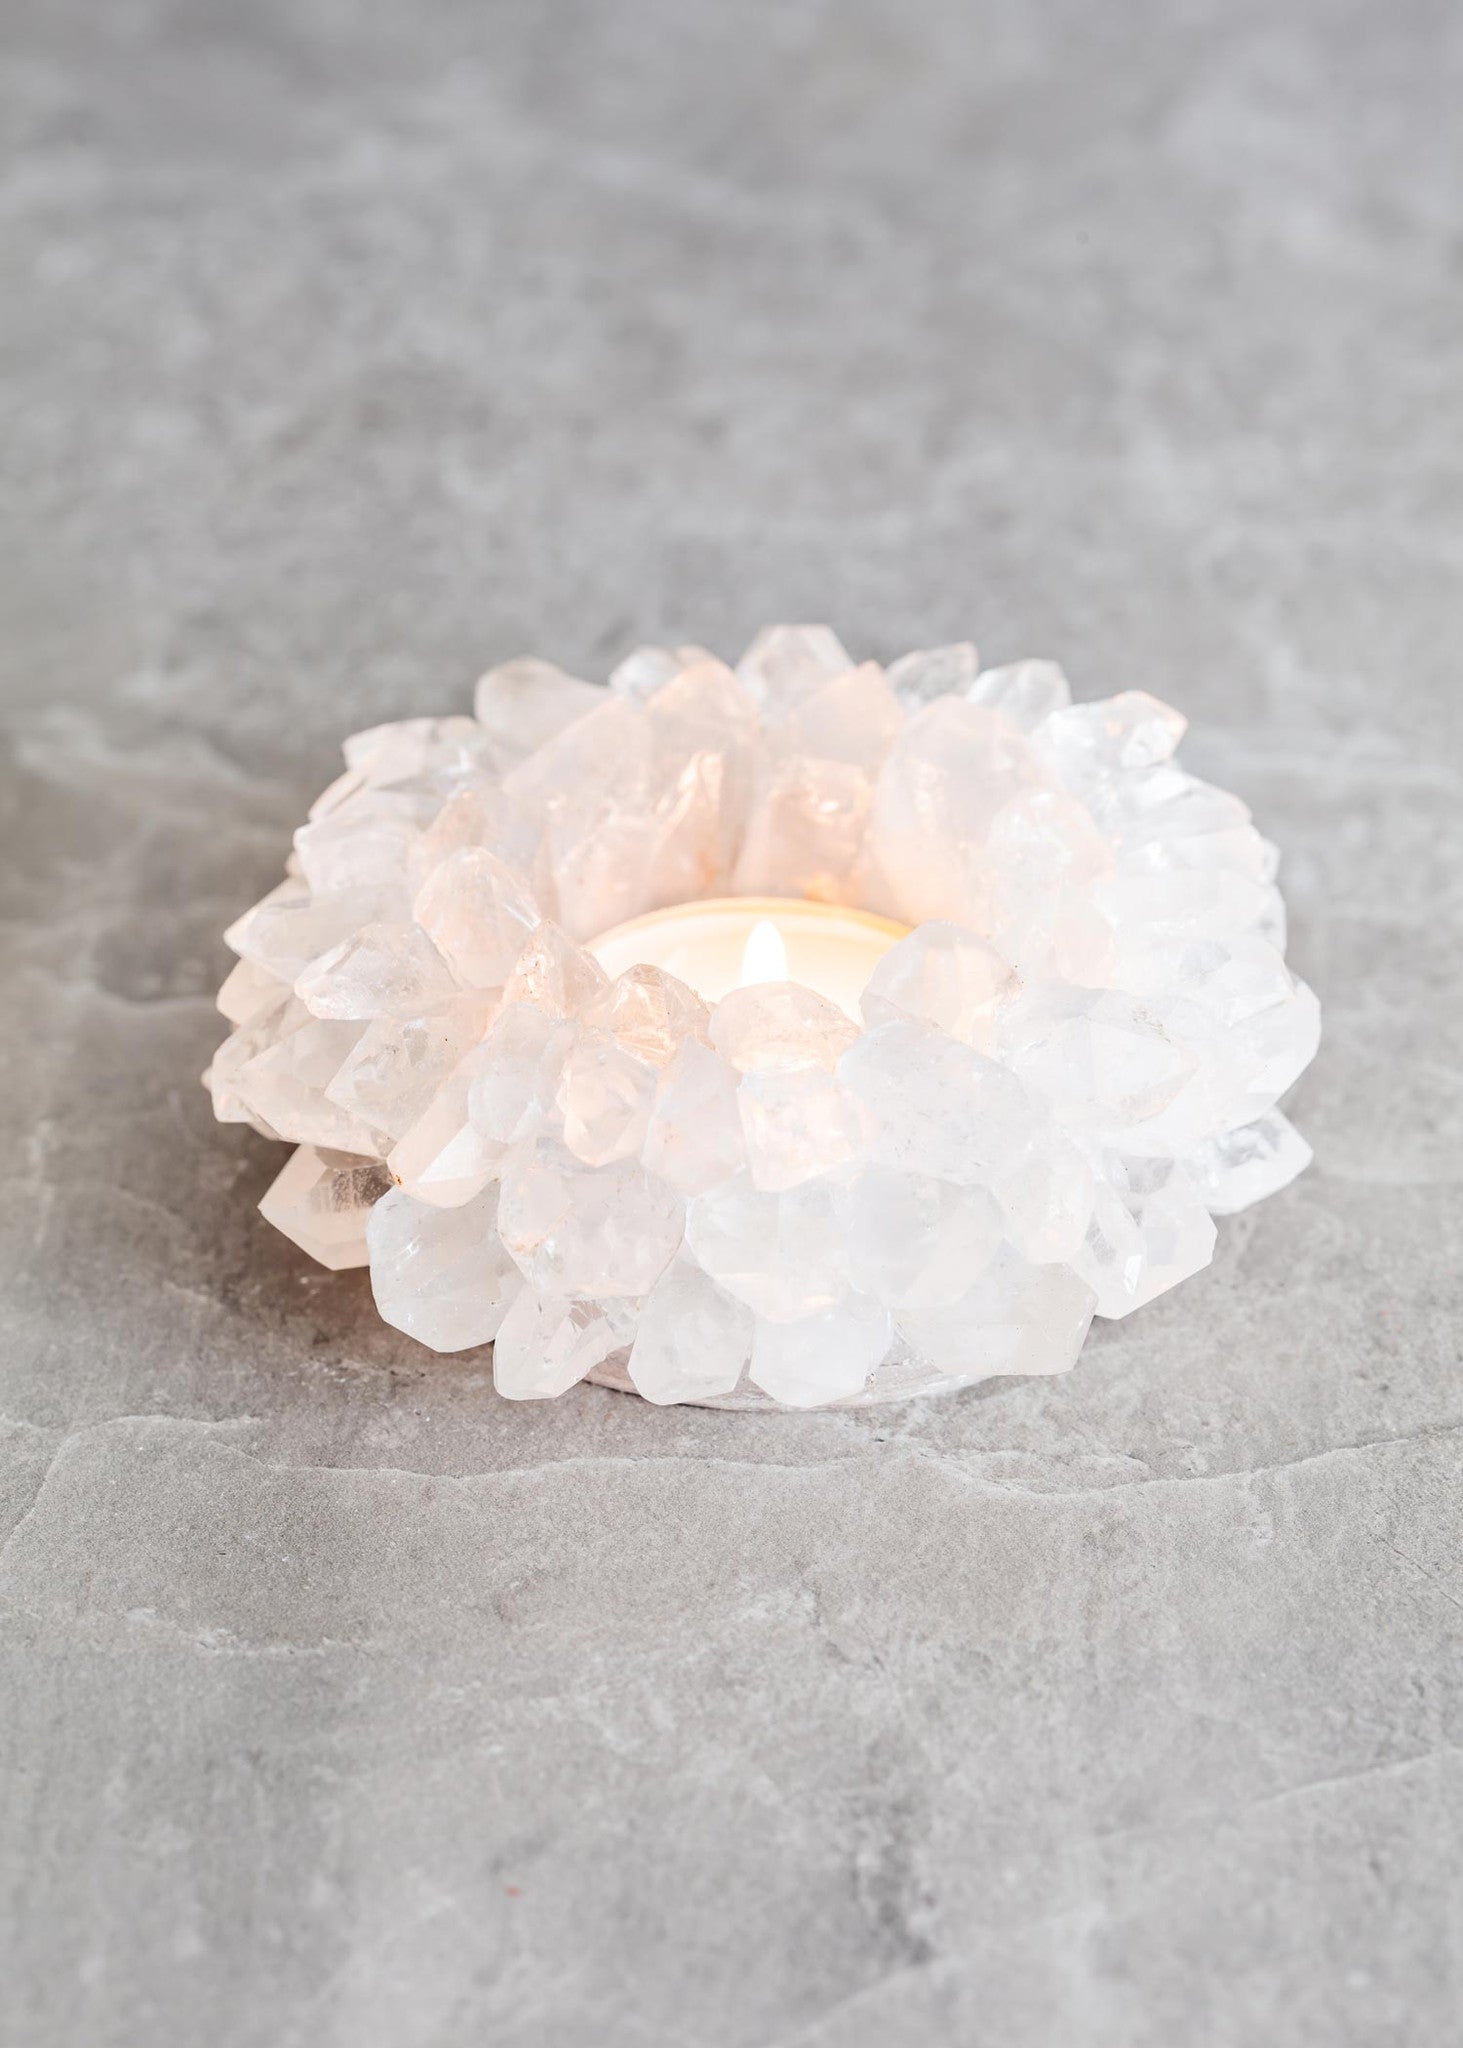 The Soul Makes Clear Quartz Lotus Candle Holder product recommended by Jessica Wilke on Improve Her Health.